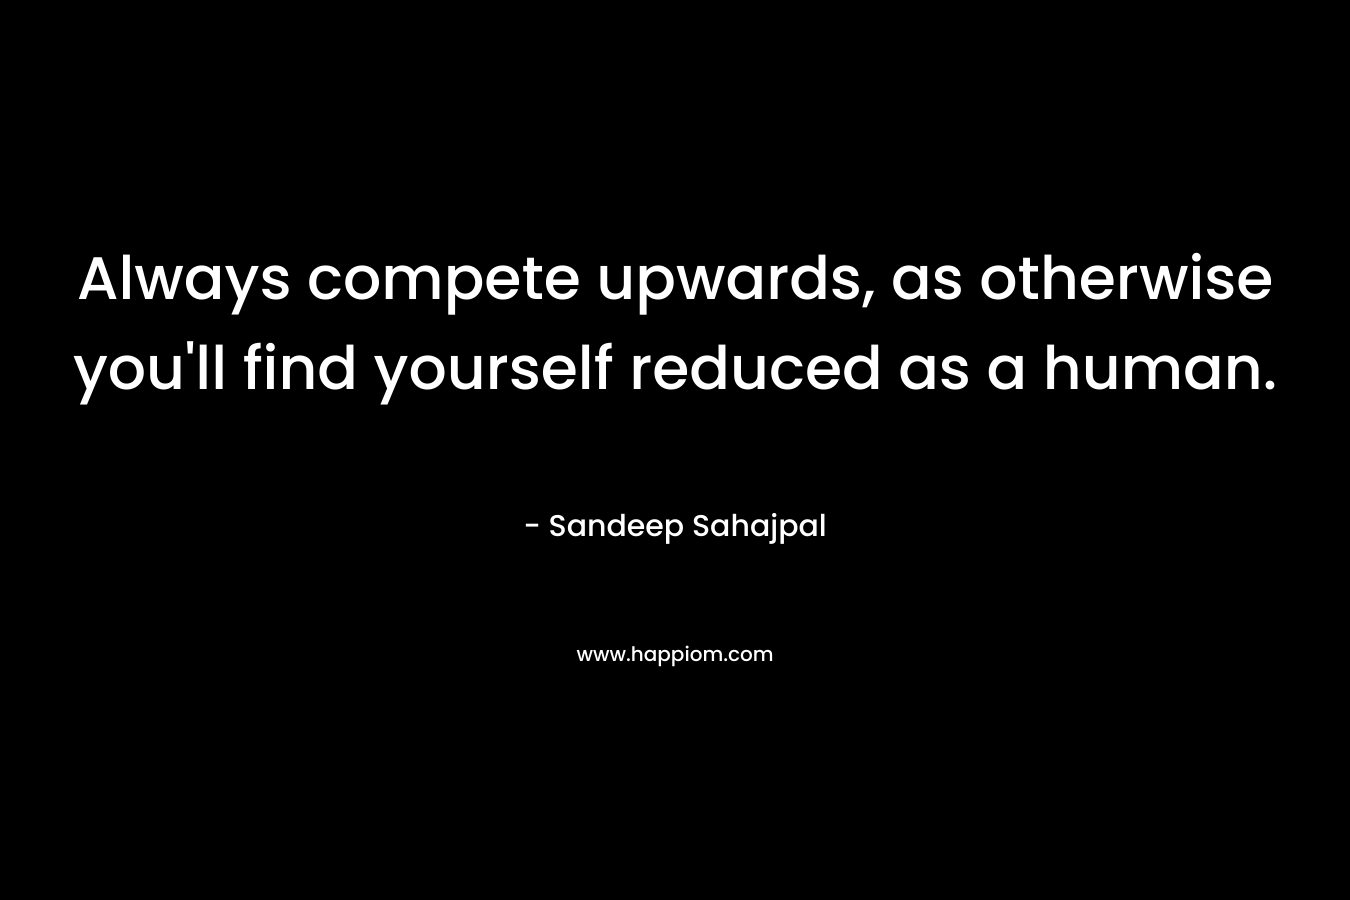 Always compete upwards, as otherwise you’ll find yourself reduced as a human. – Sandeep Sahajpal